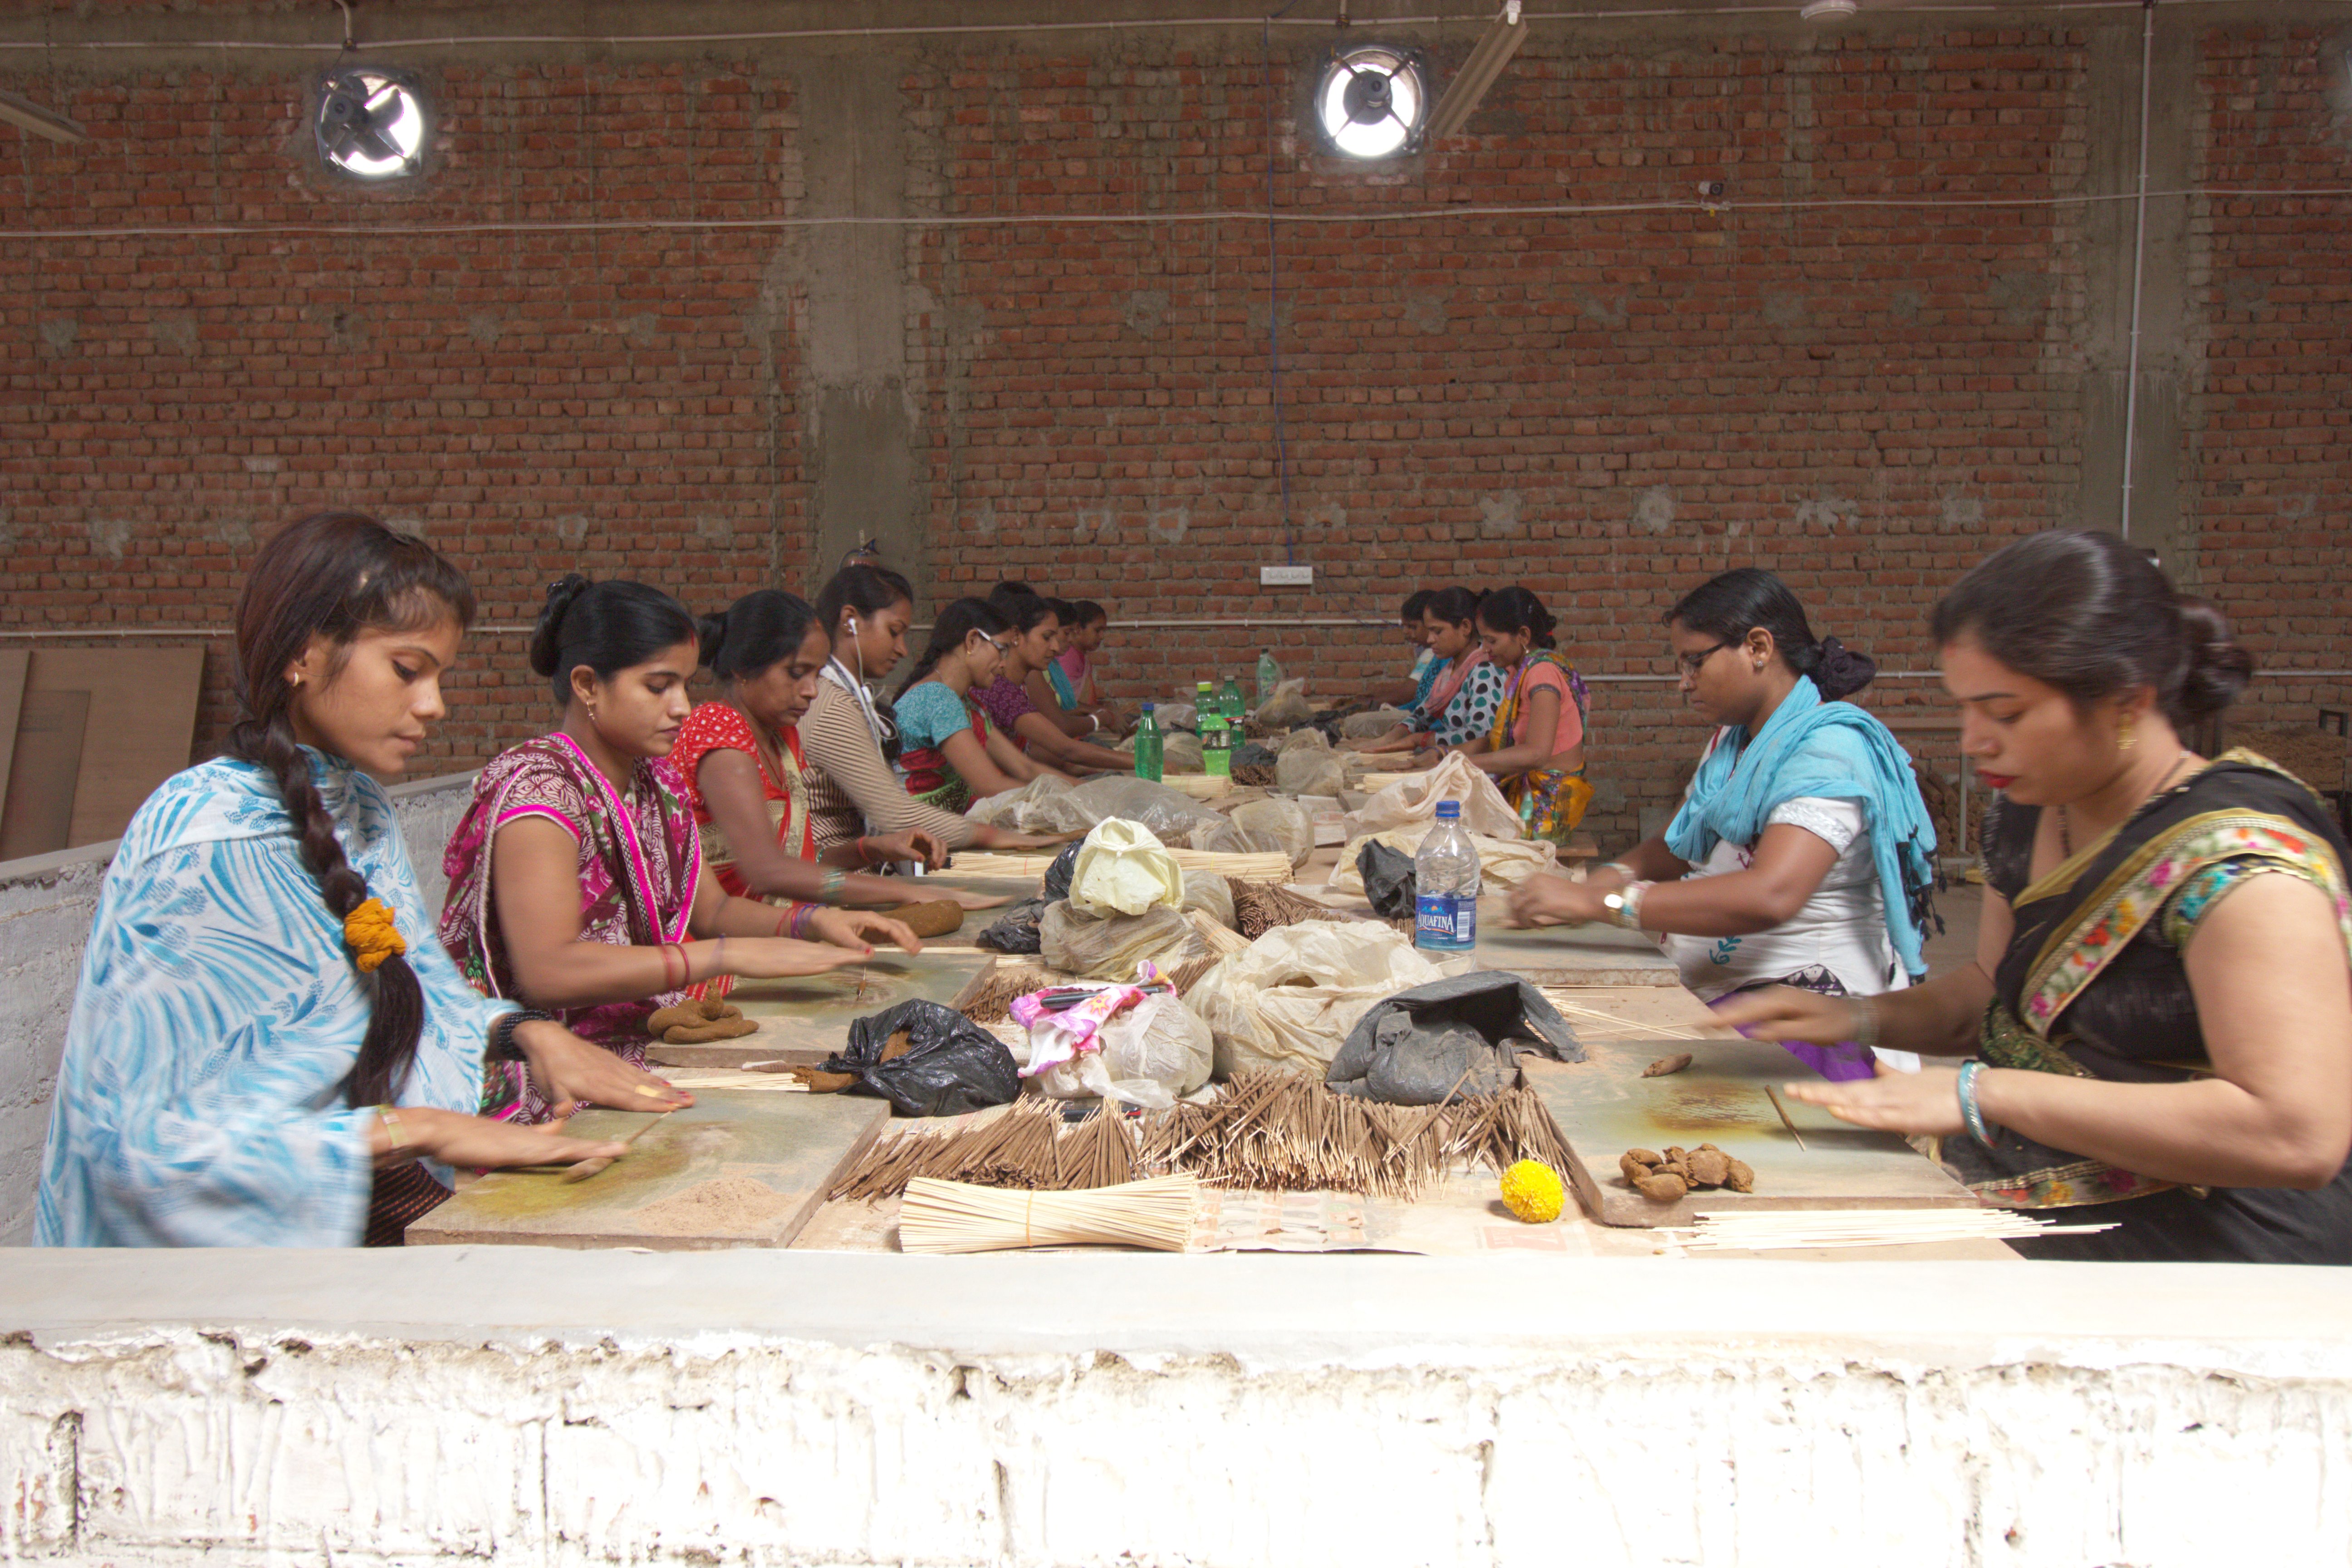 Women sitting around a table making incense sticks with their hands